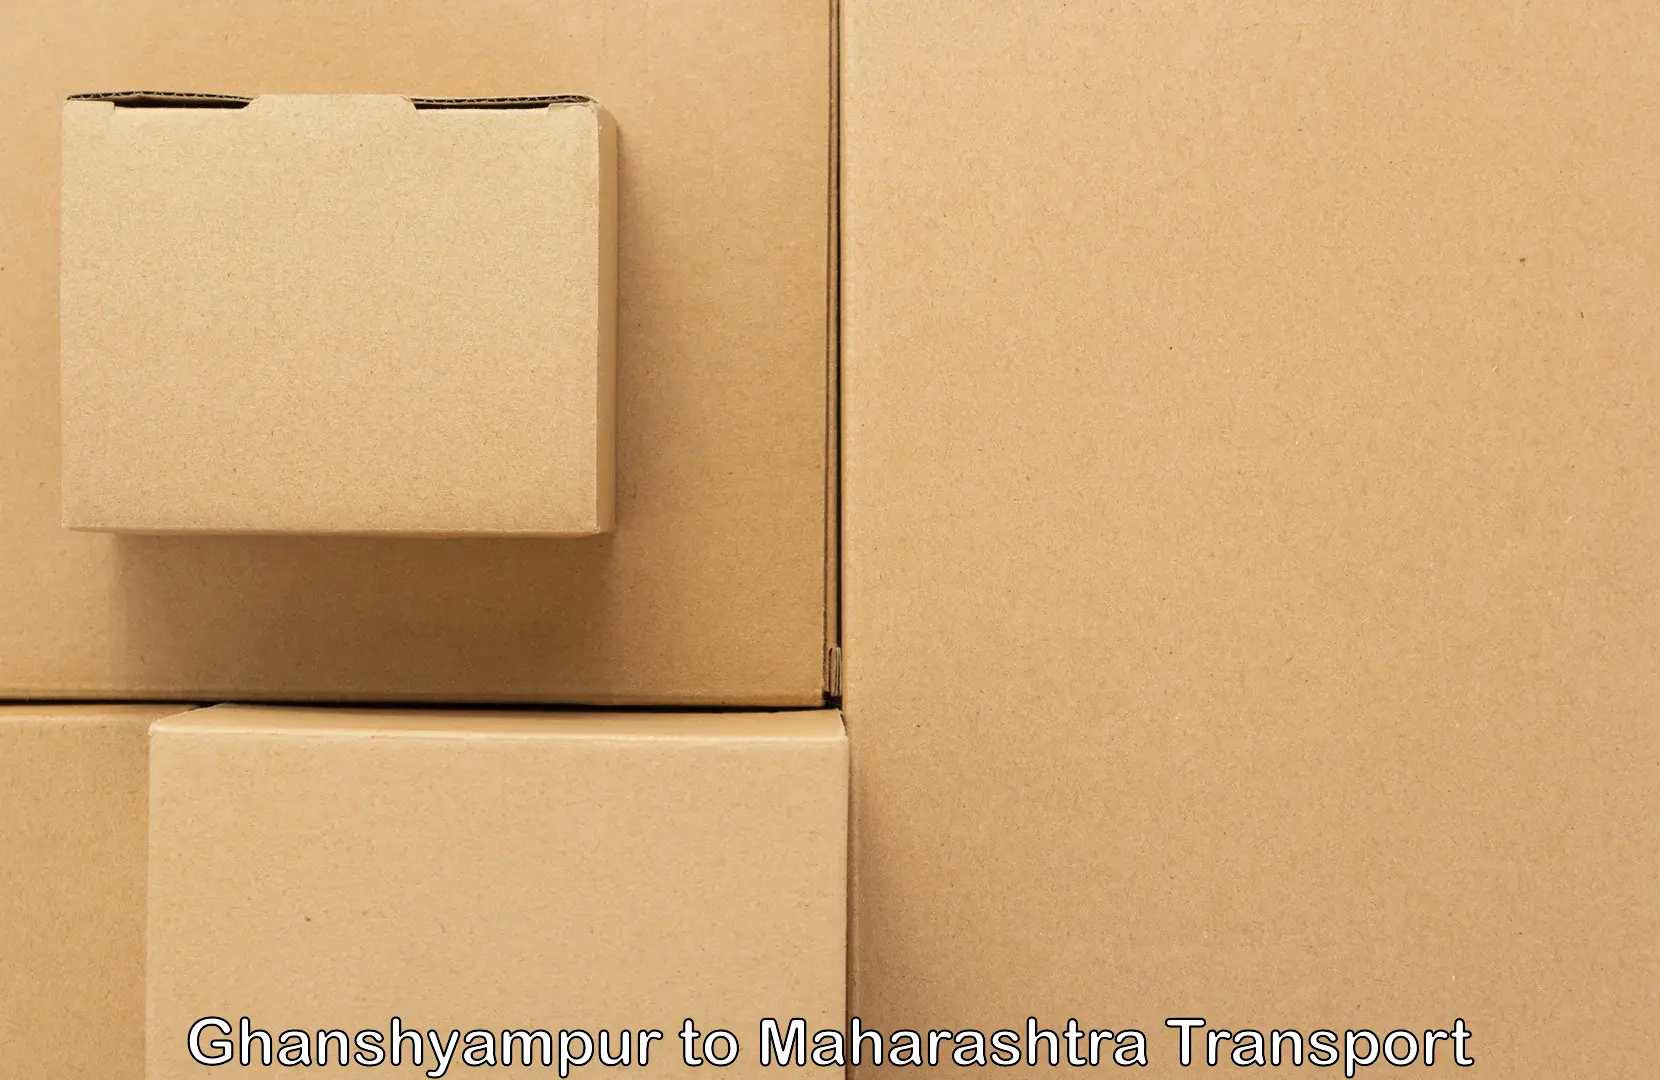 Package delivery services in Ghanshyampur to Brahmapuri